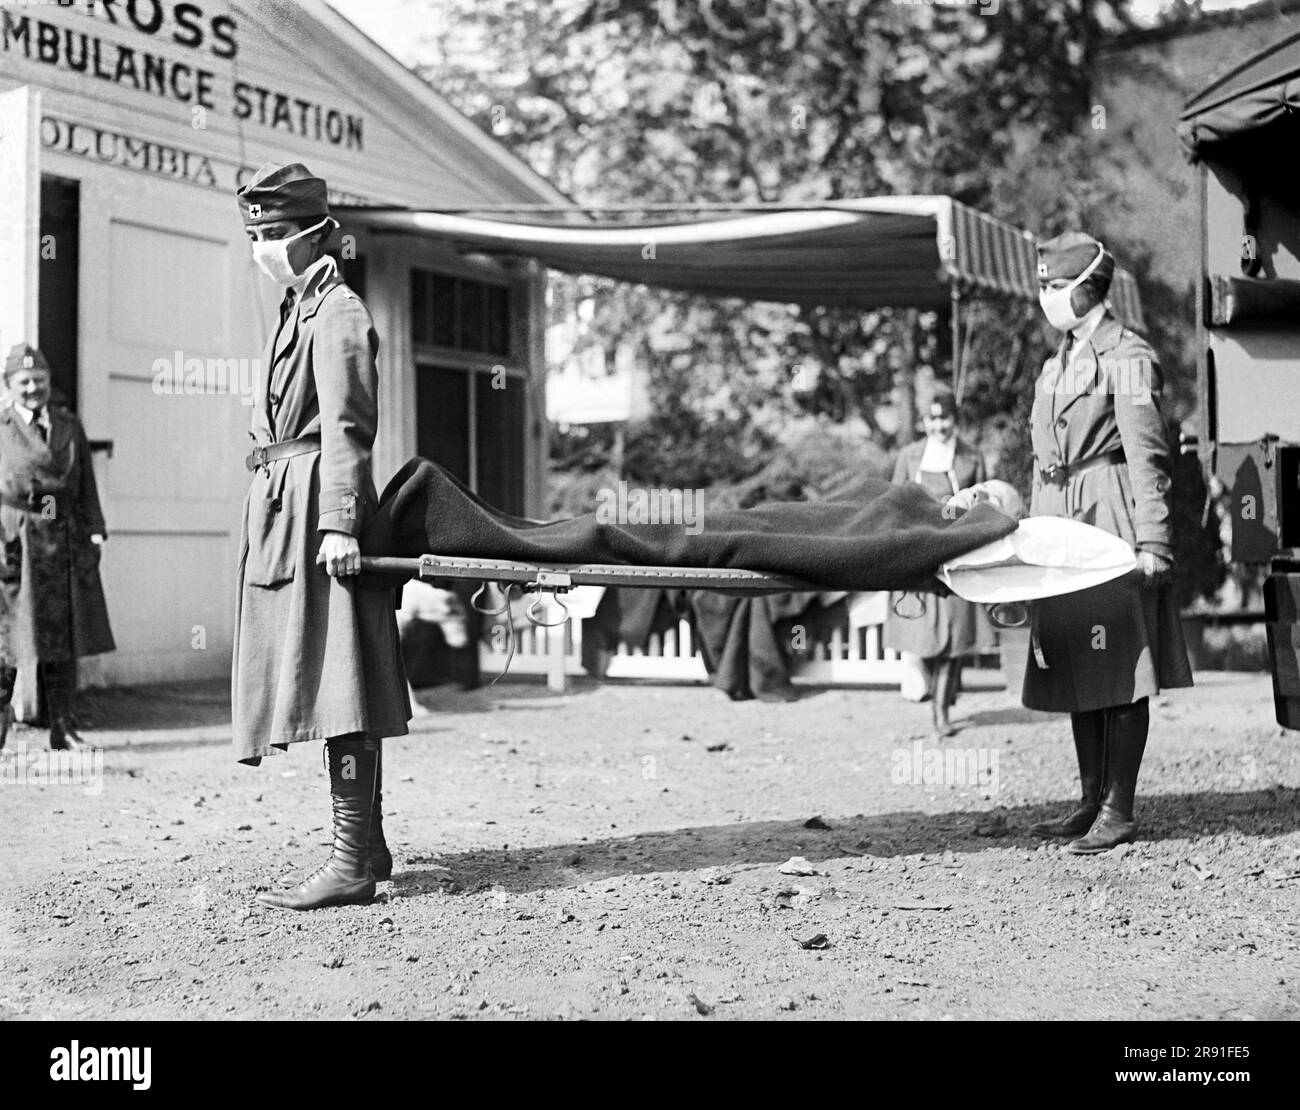 Washington, D.C.:  1918 Two Red Cross nurses with a person on a stretcher during a demonstration at the Red Cross Emergency Ambulance Station during the influenza pandemic of 1918-1920. Stock Photo